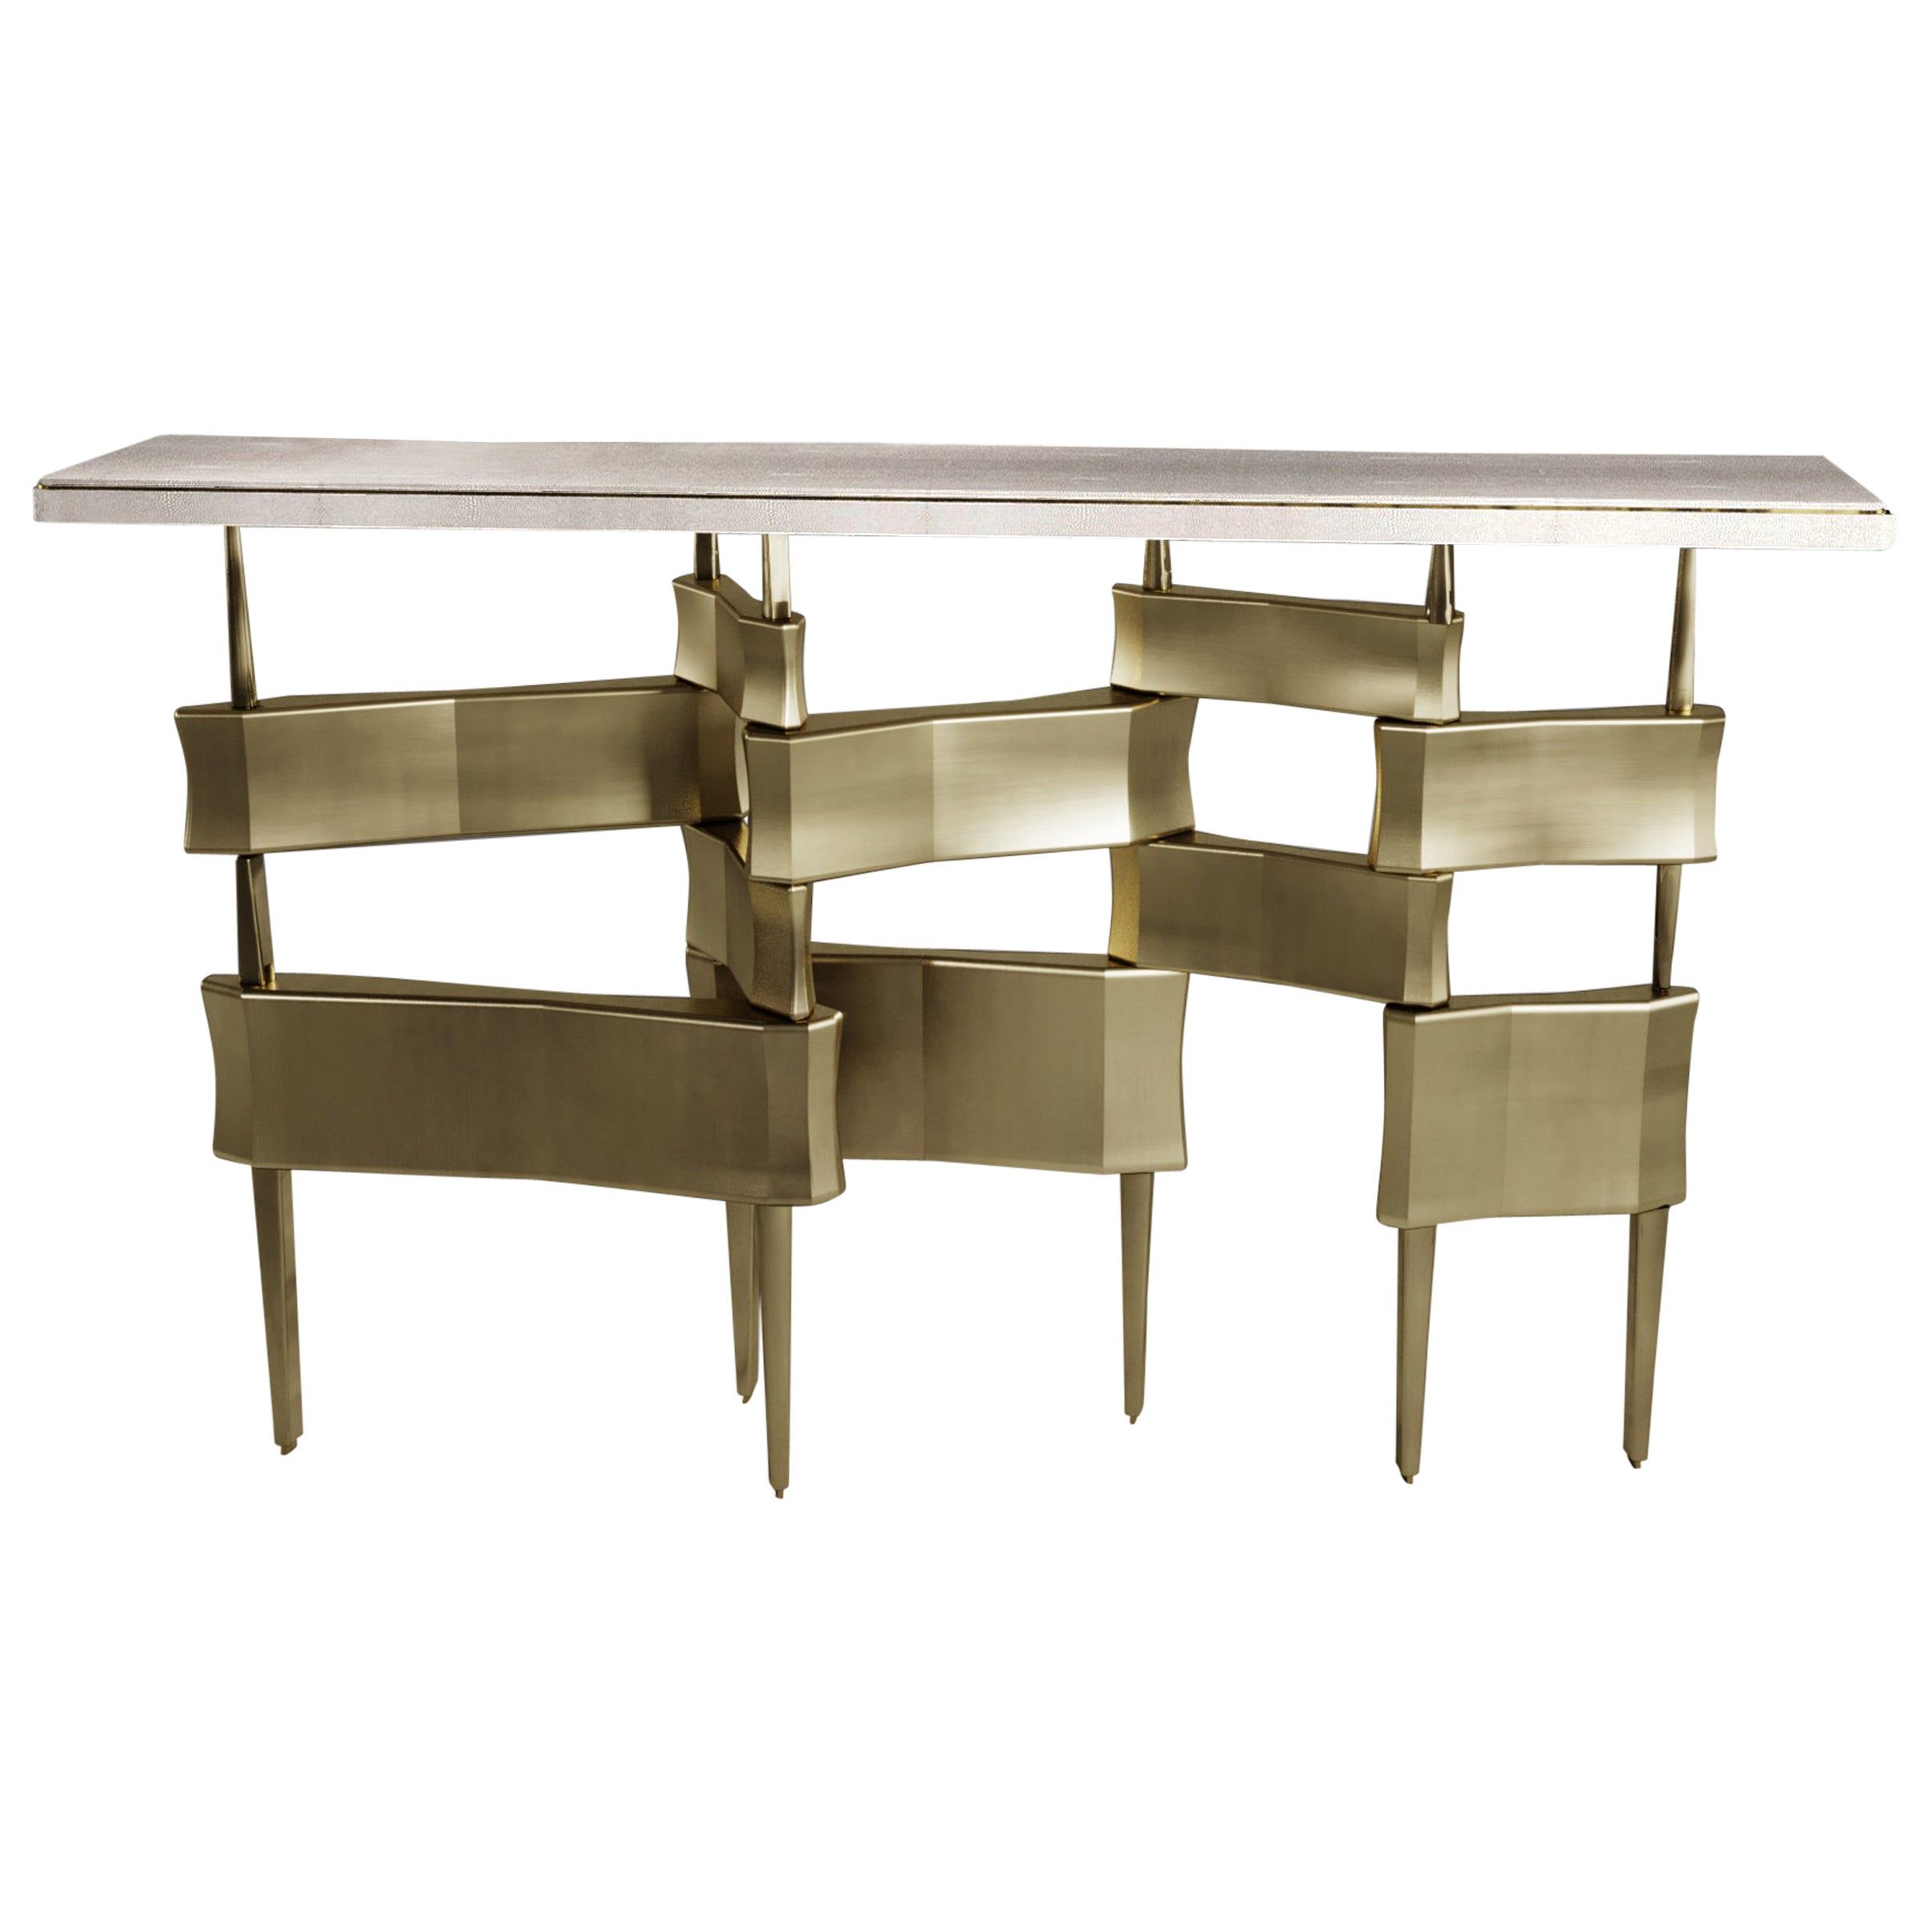 Metropolis Console Table In Cream Shagreen And Bronze In Rustic Bronze Patina Console Tables (View 10 of 20)